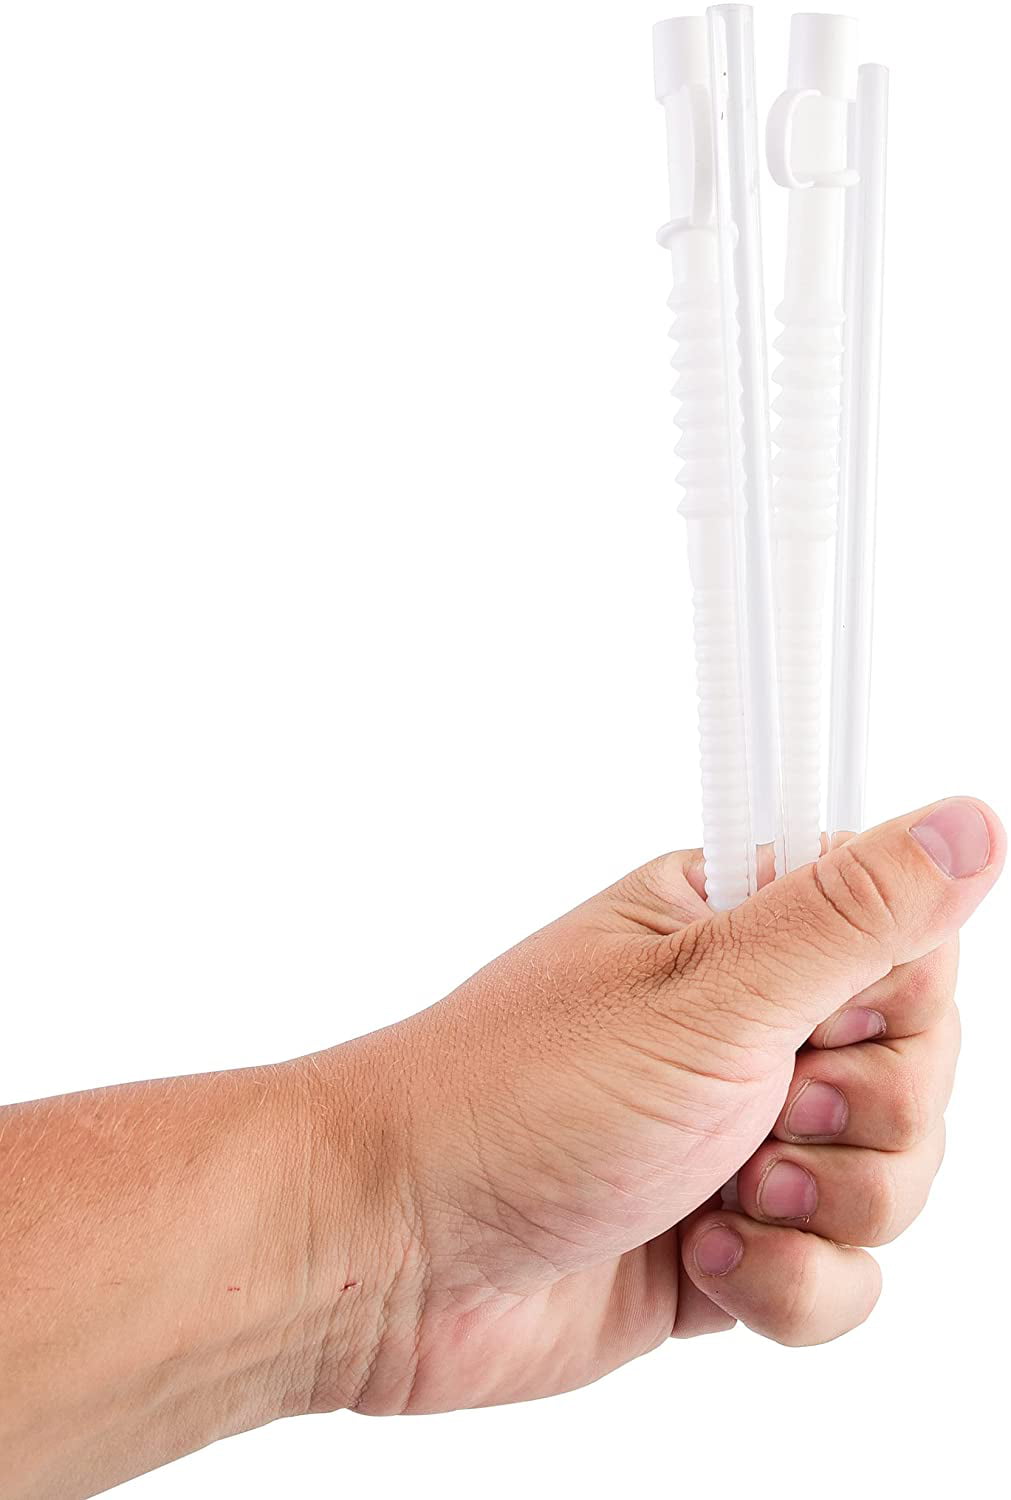 HotSips Reusable Drinking Straws - Cold & Hot Beverages Made in USA  Ergonomic Shape to reduce pucker for Mugs, Cups & Tumblers 12-24 oz, Straws  with